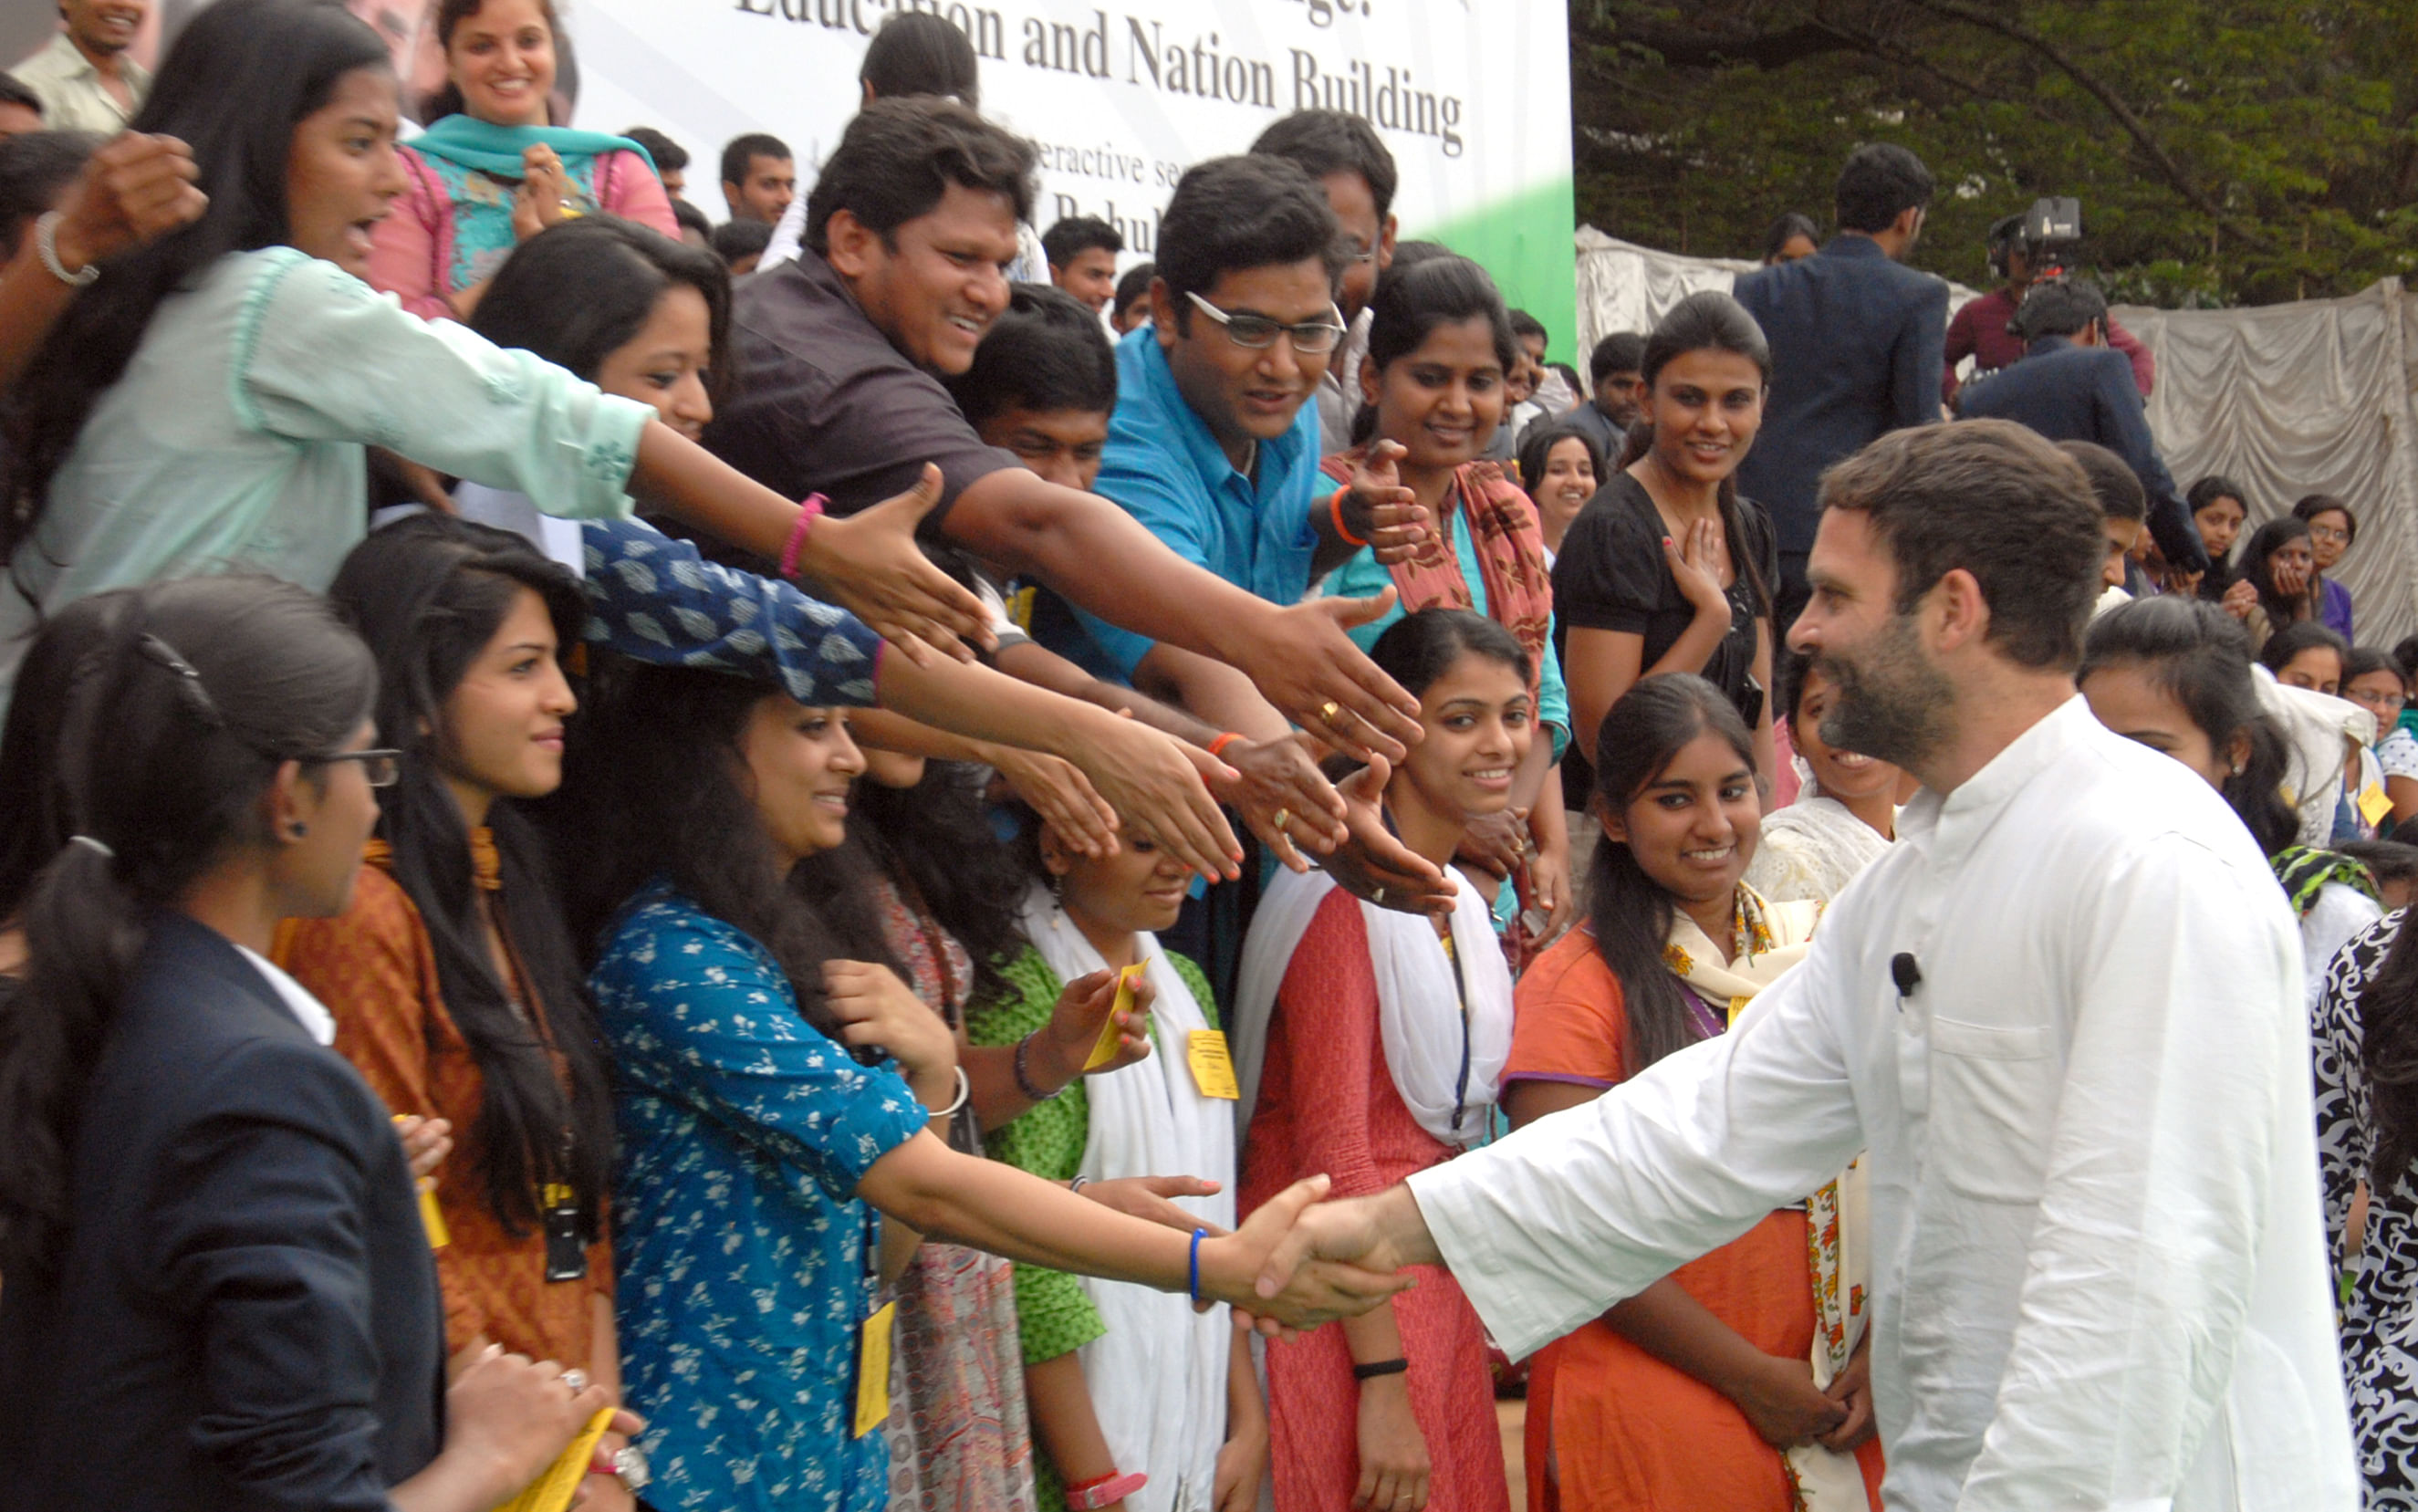 All smiles: AICC vice-president Rahul Gandhi shakes hand with a student at a programme in Central College Grounds in Bangalore on Saturday. DH Photo